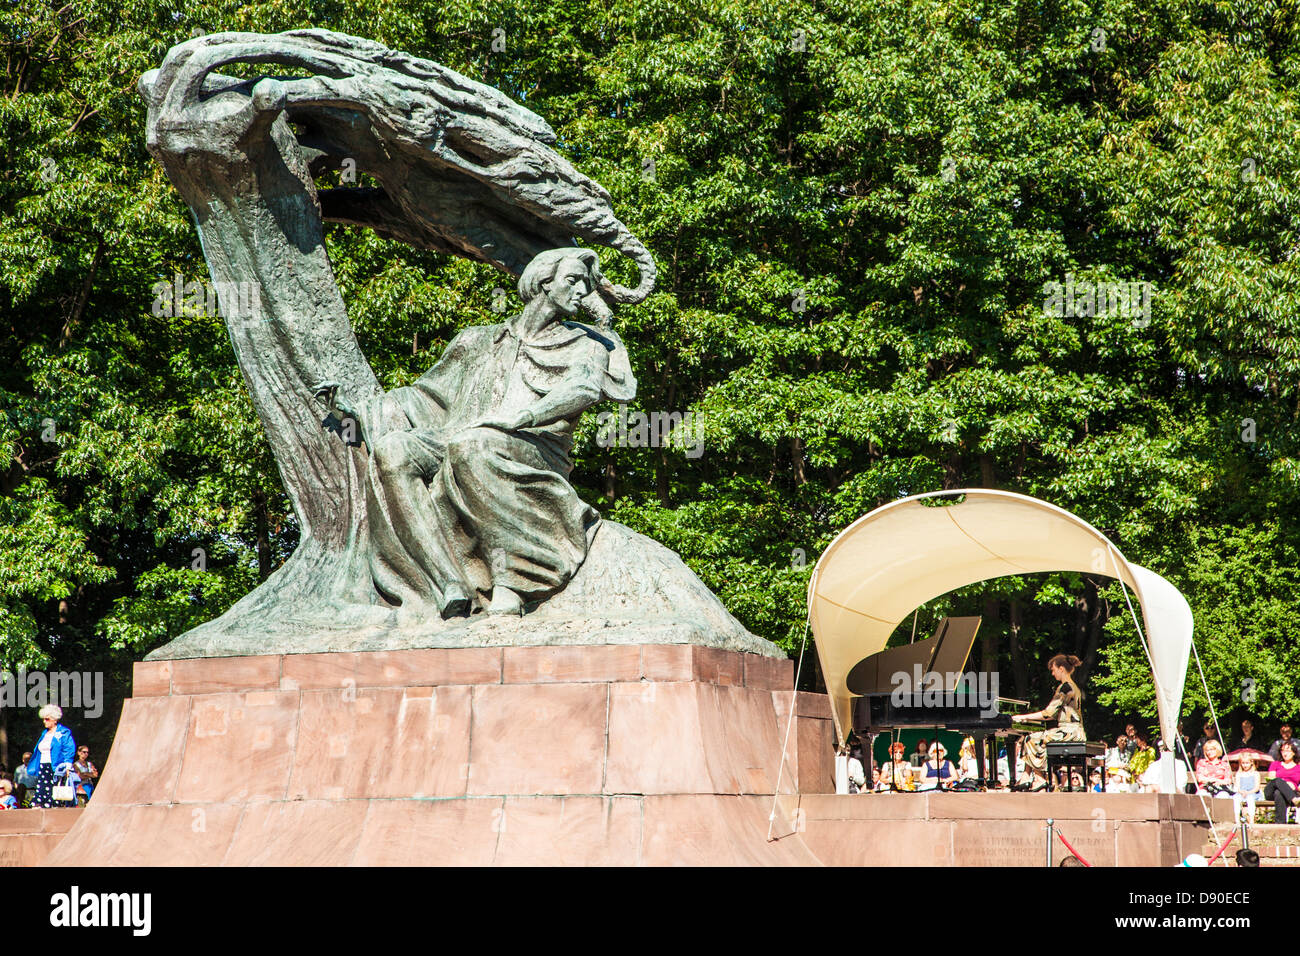 A Sunday afternoon piano recital beneath Chopin's statue in Lazienki Park, Warsaw. Stock Photo